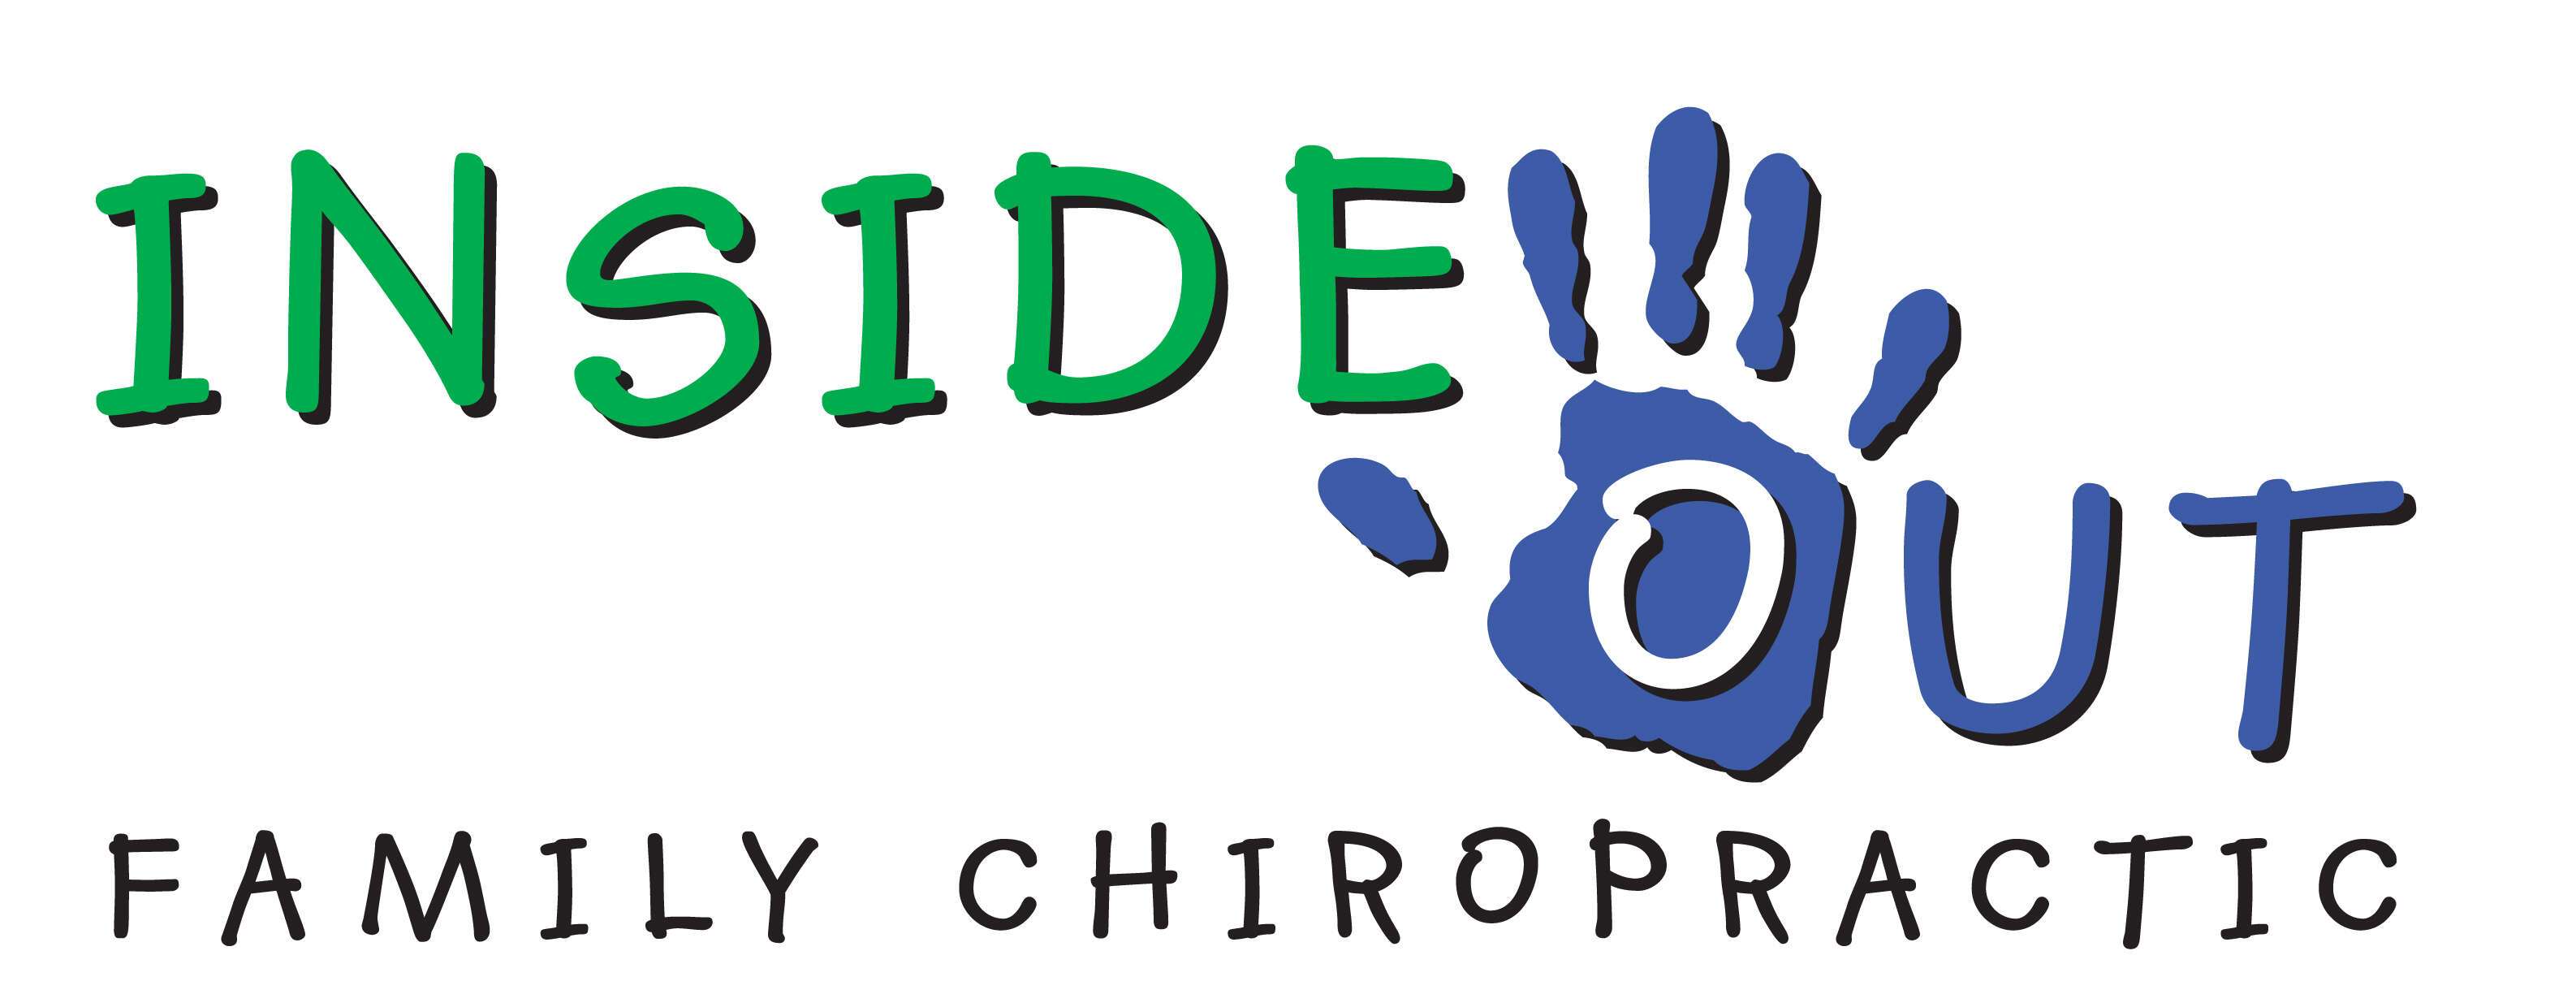 Inside Out Chiropractic